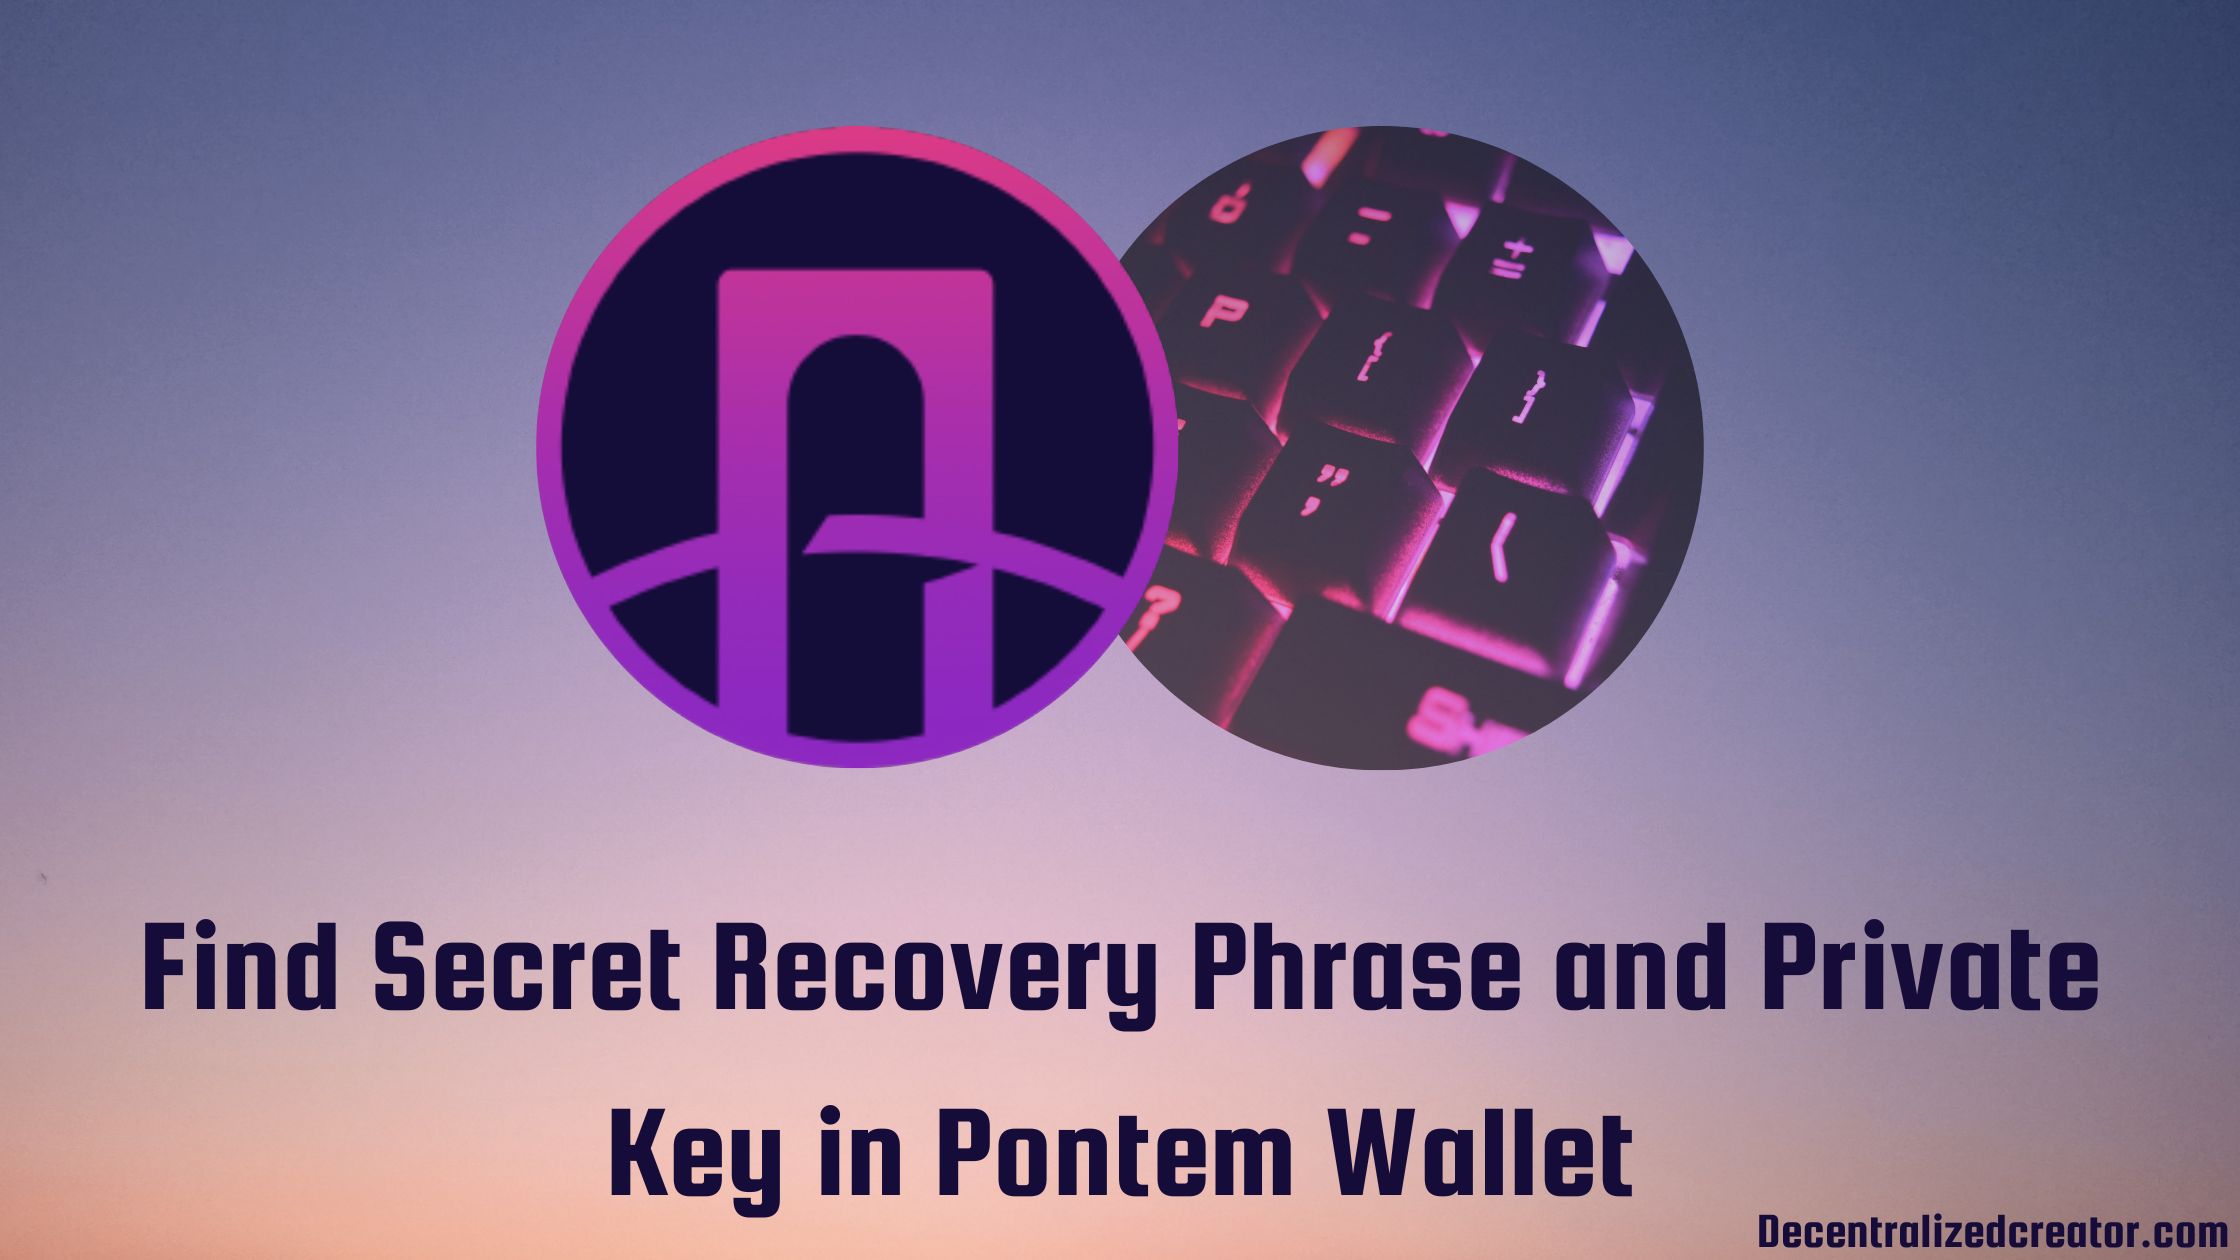 Find Secret Recovery Phrase and Private Key in Pontem Wallet